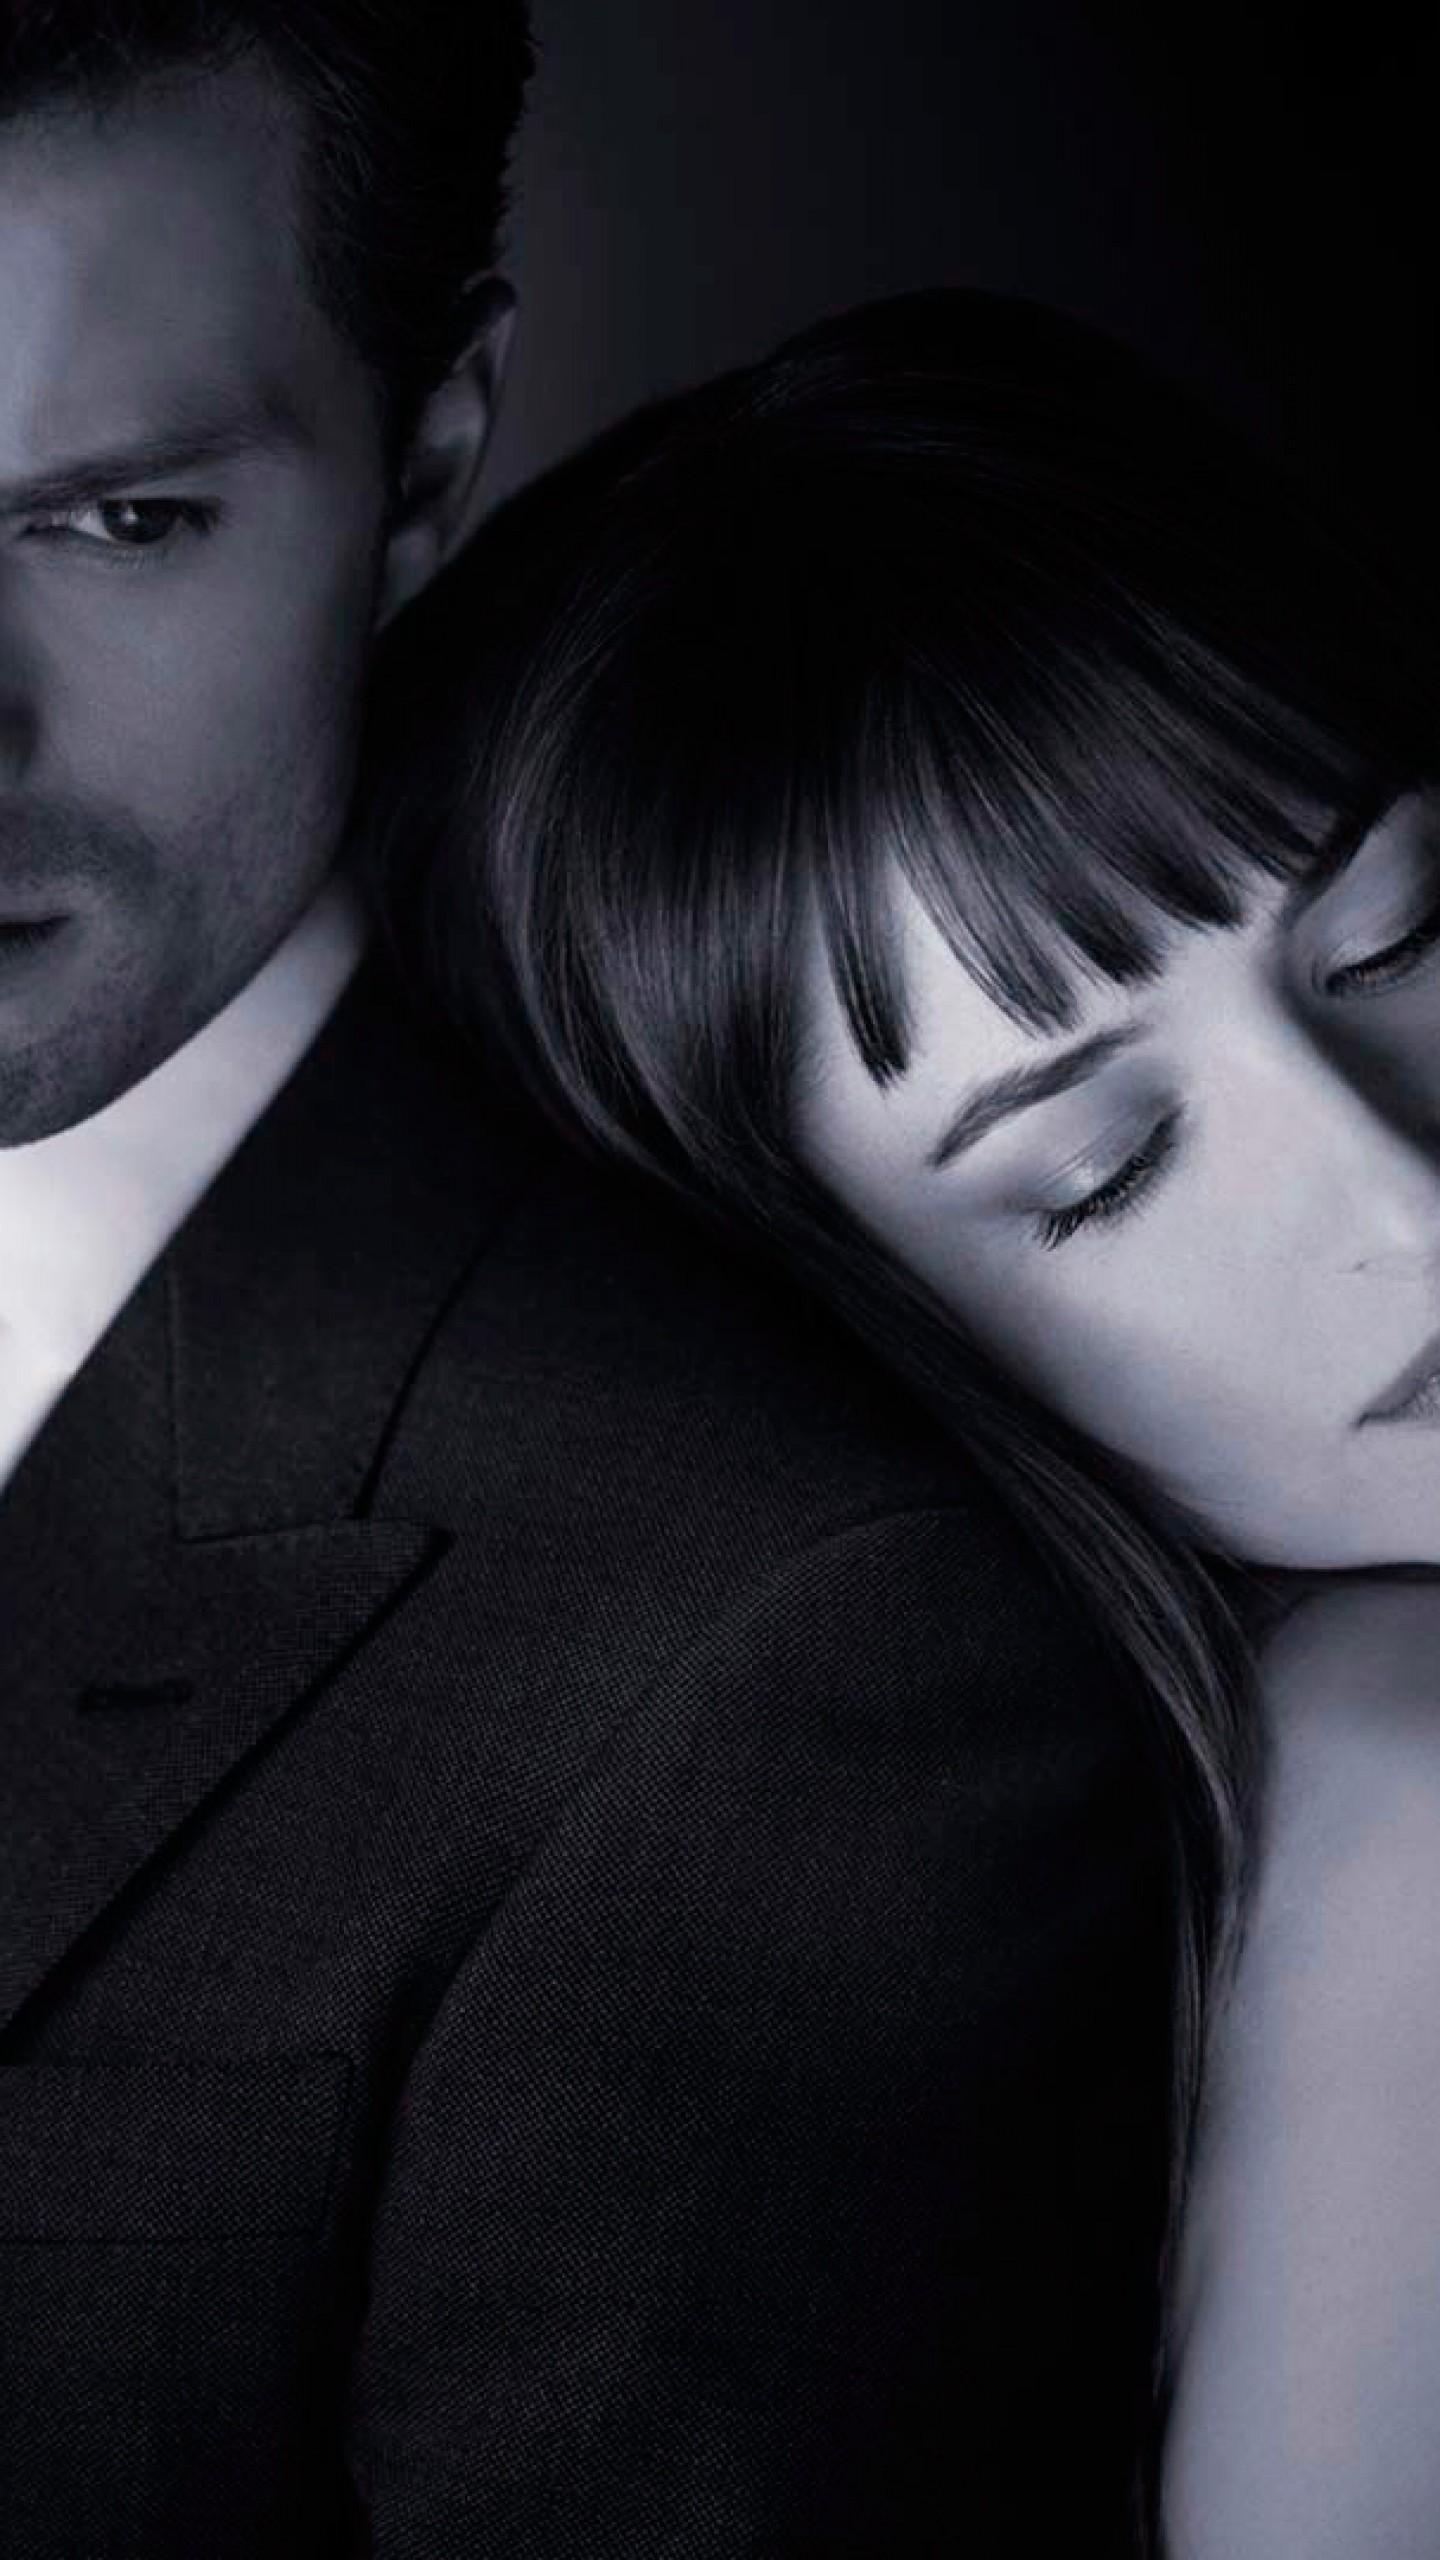 Fifty Shades Darker Wallpapers